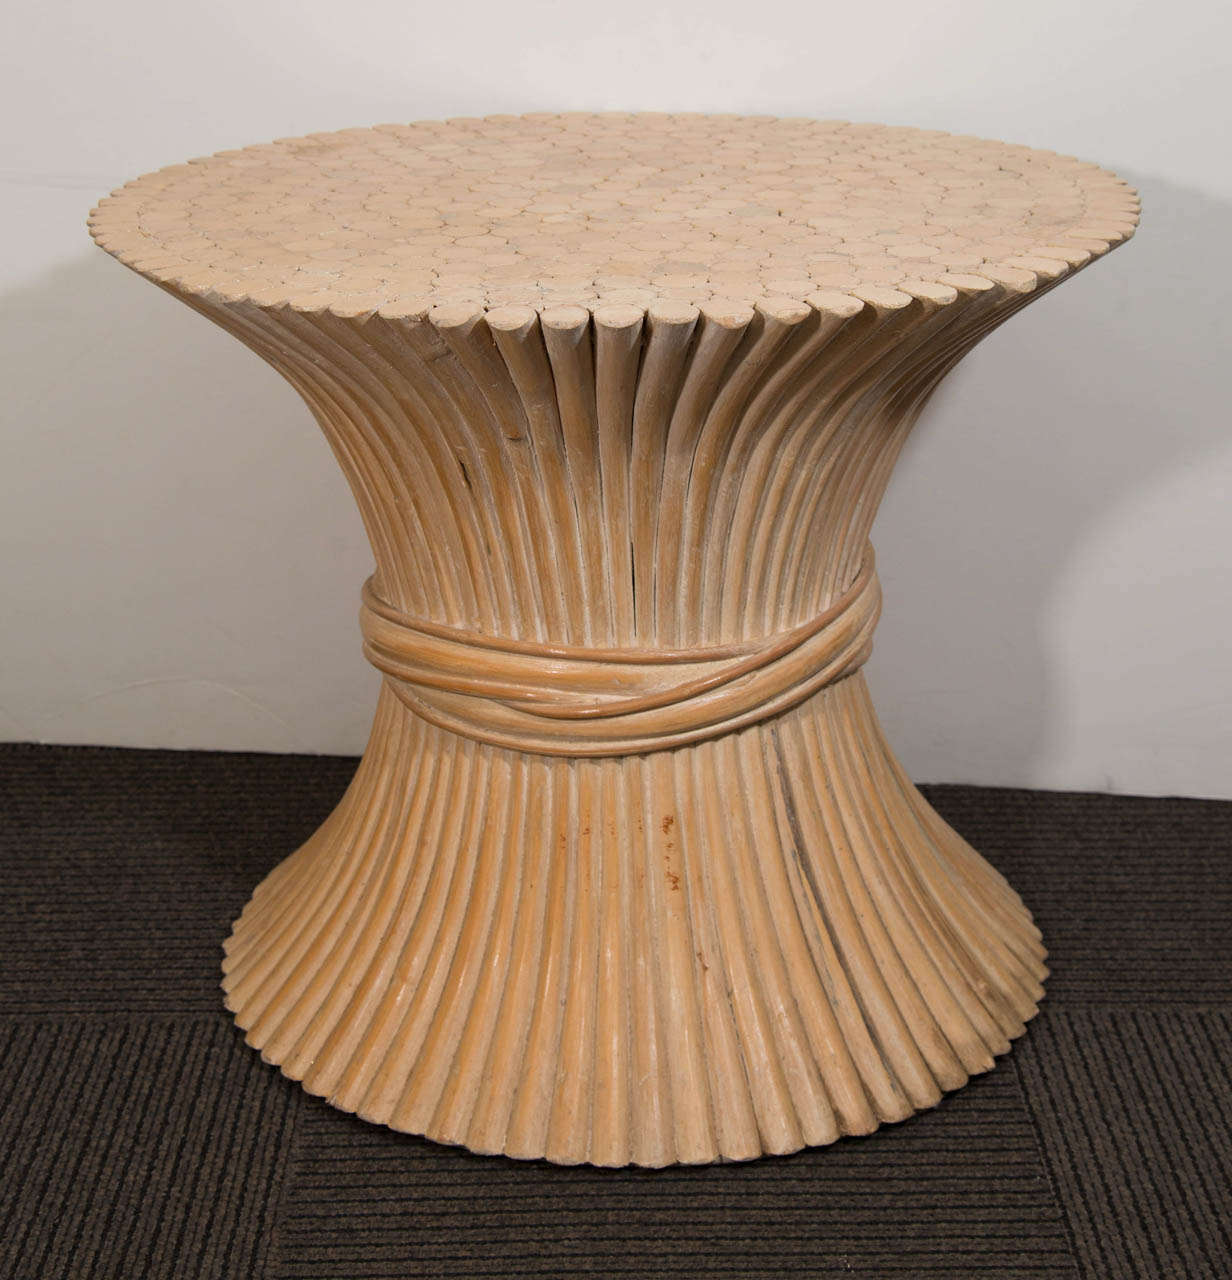 A vintage natural rattan side table in the form of a sheaf of wheat by McGuire.
Currently out of production. The base is handcrafted of Palasan rattan poles that are cinched in the middle by a heavy braid of rattan. The top surface is a beautiful